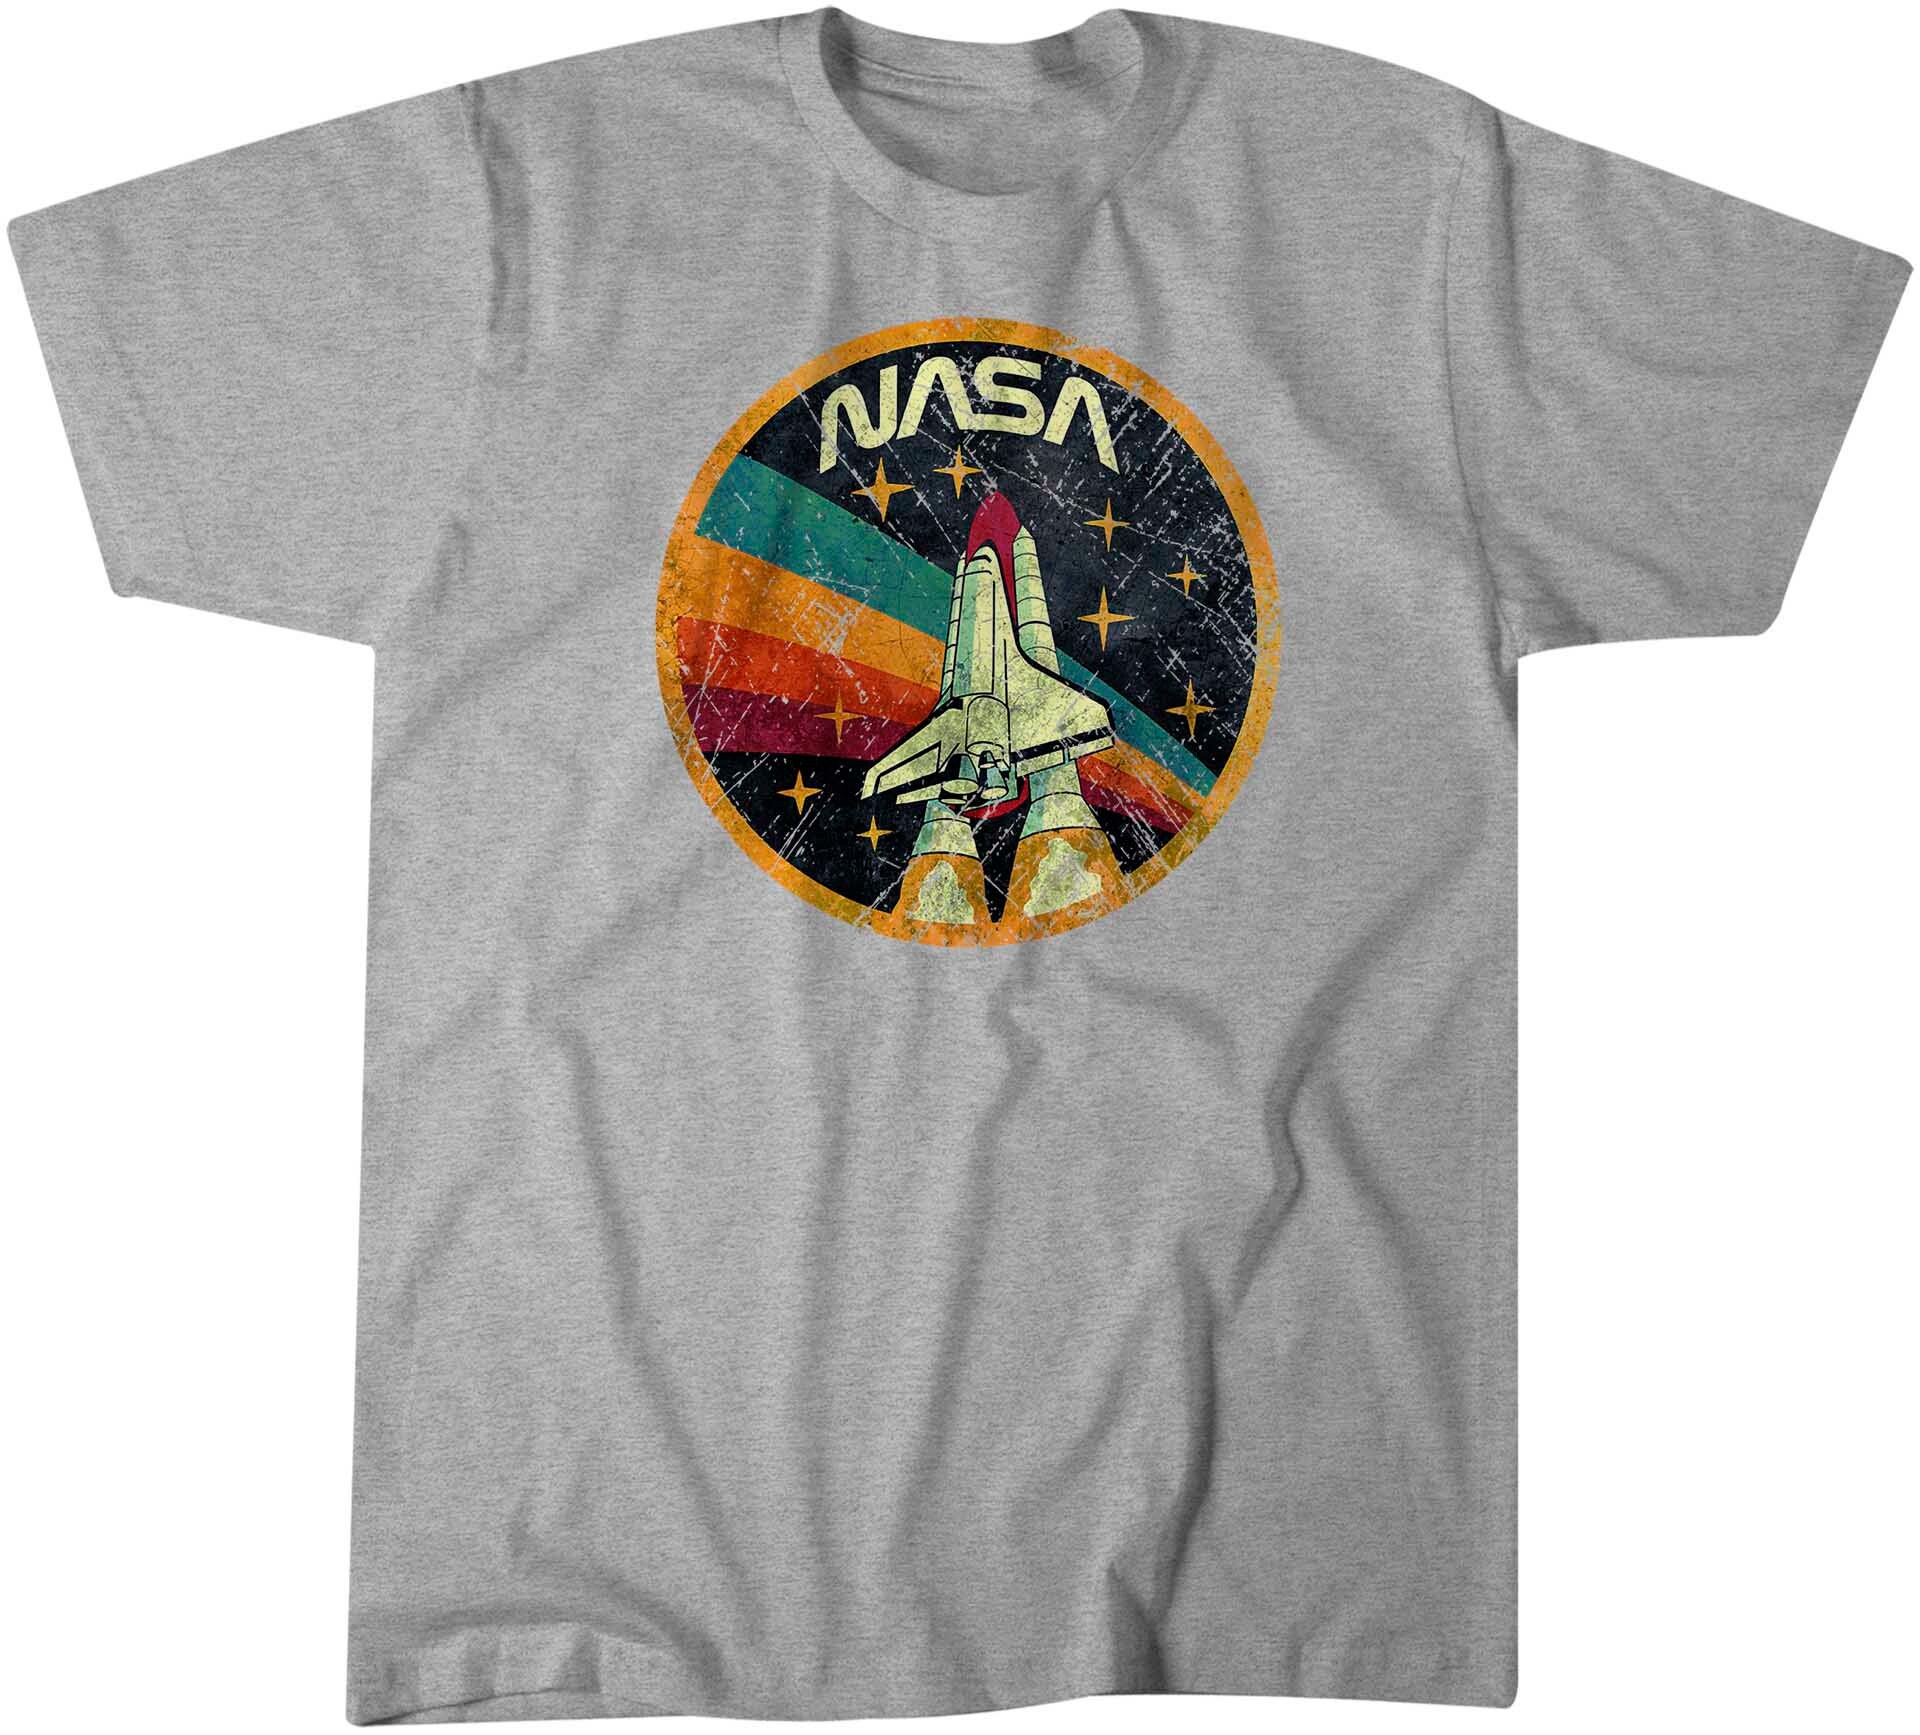 Discover NASA T Shirt Cool Gift Distressed Logo Space Agency Vintage Tee